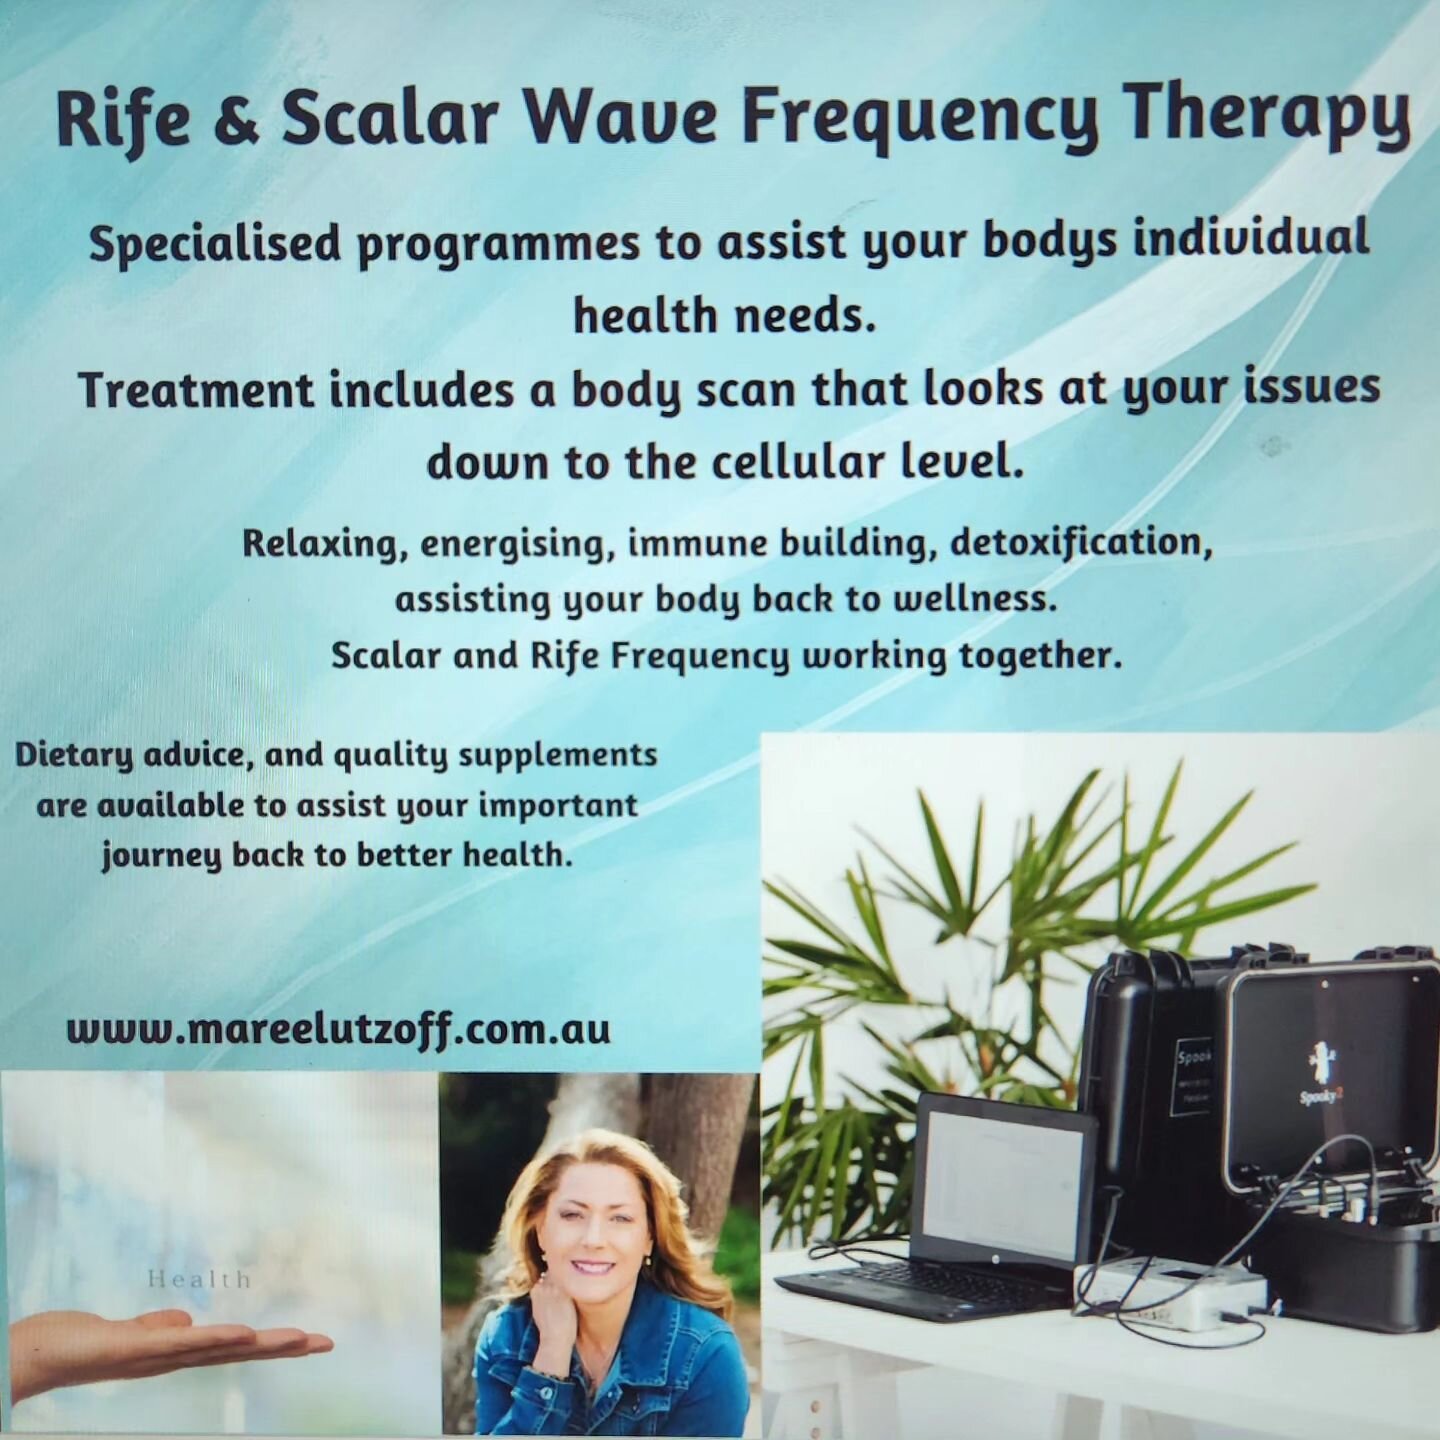 Specialized programs for your health needs. Frequencies to enhance all body systems, assist pain relief, brain fog, energy levels, toxins in your system boost your immune system and so much more
Scalar frequency applications that close the cells afte